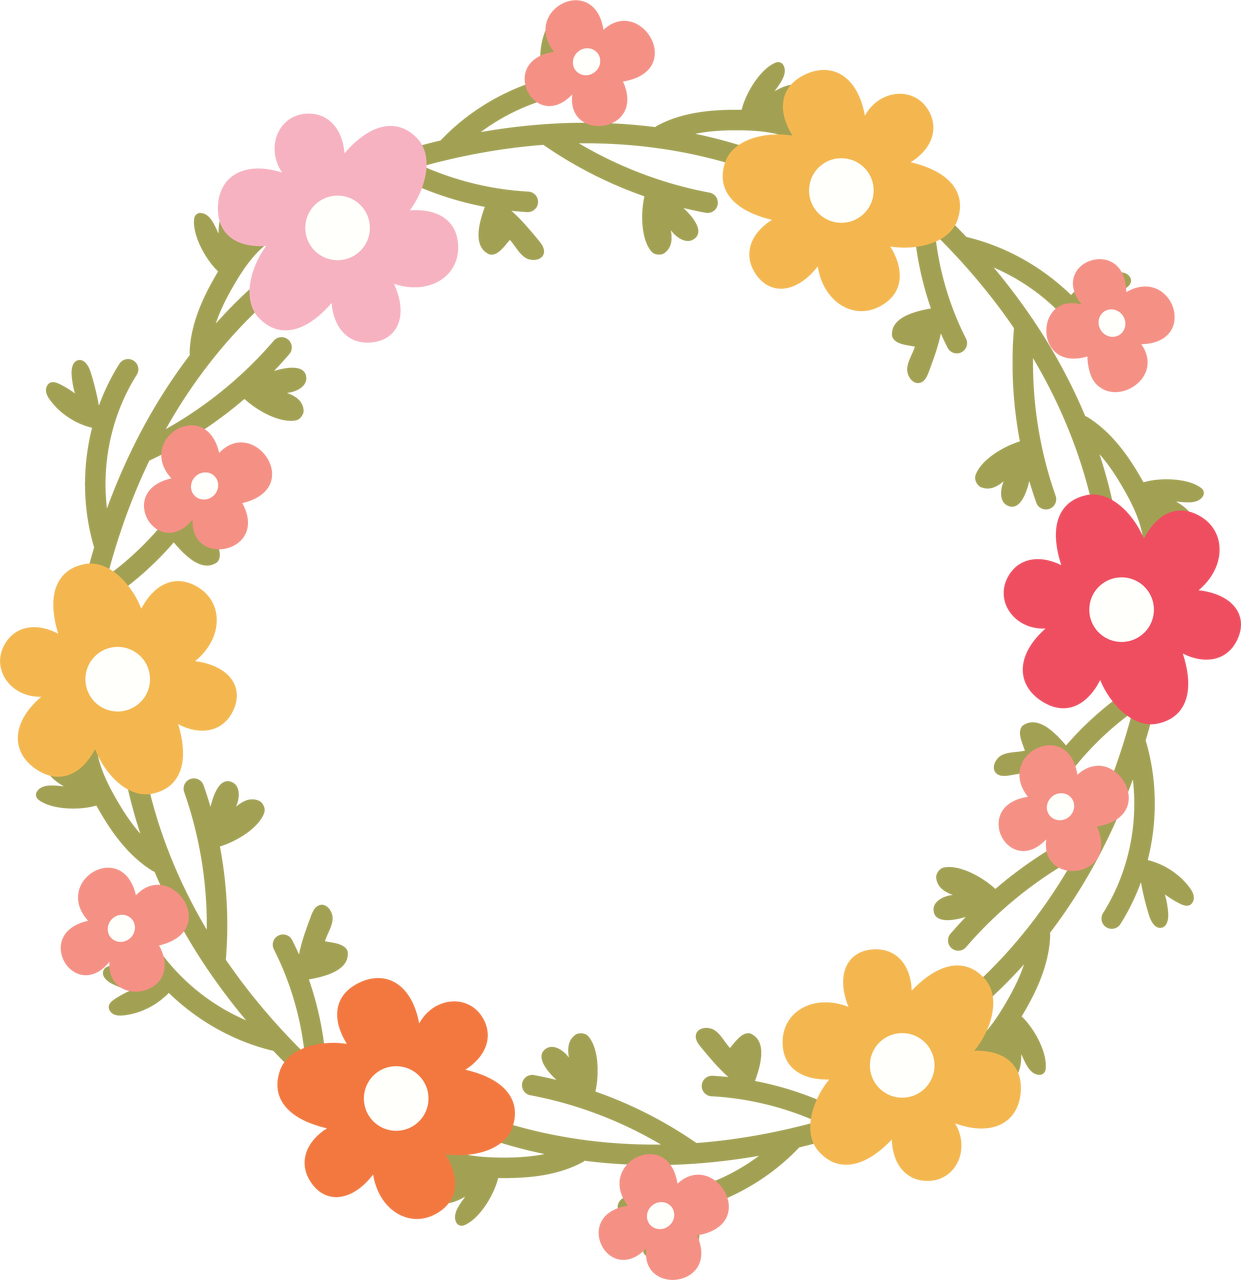 Download Floral Wreath SVG Cut File - Snap Click Supply Co.